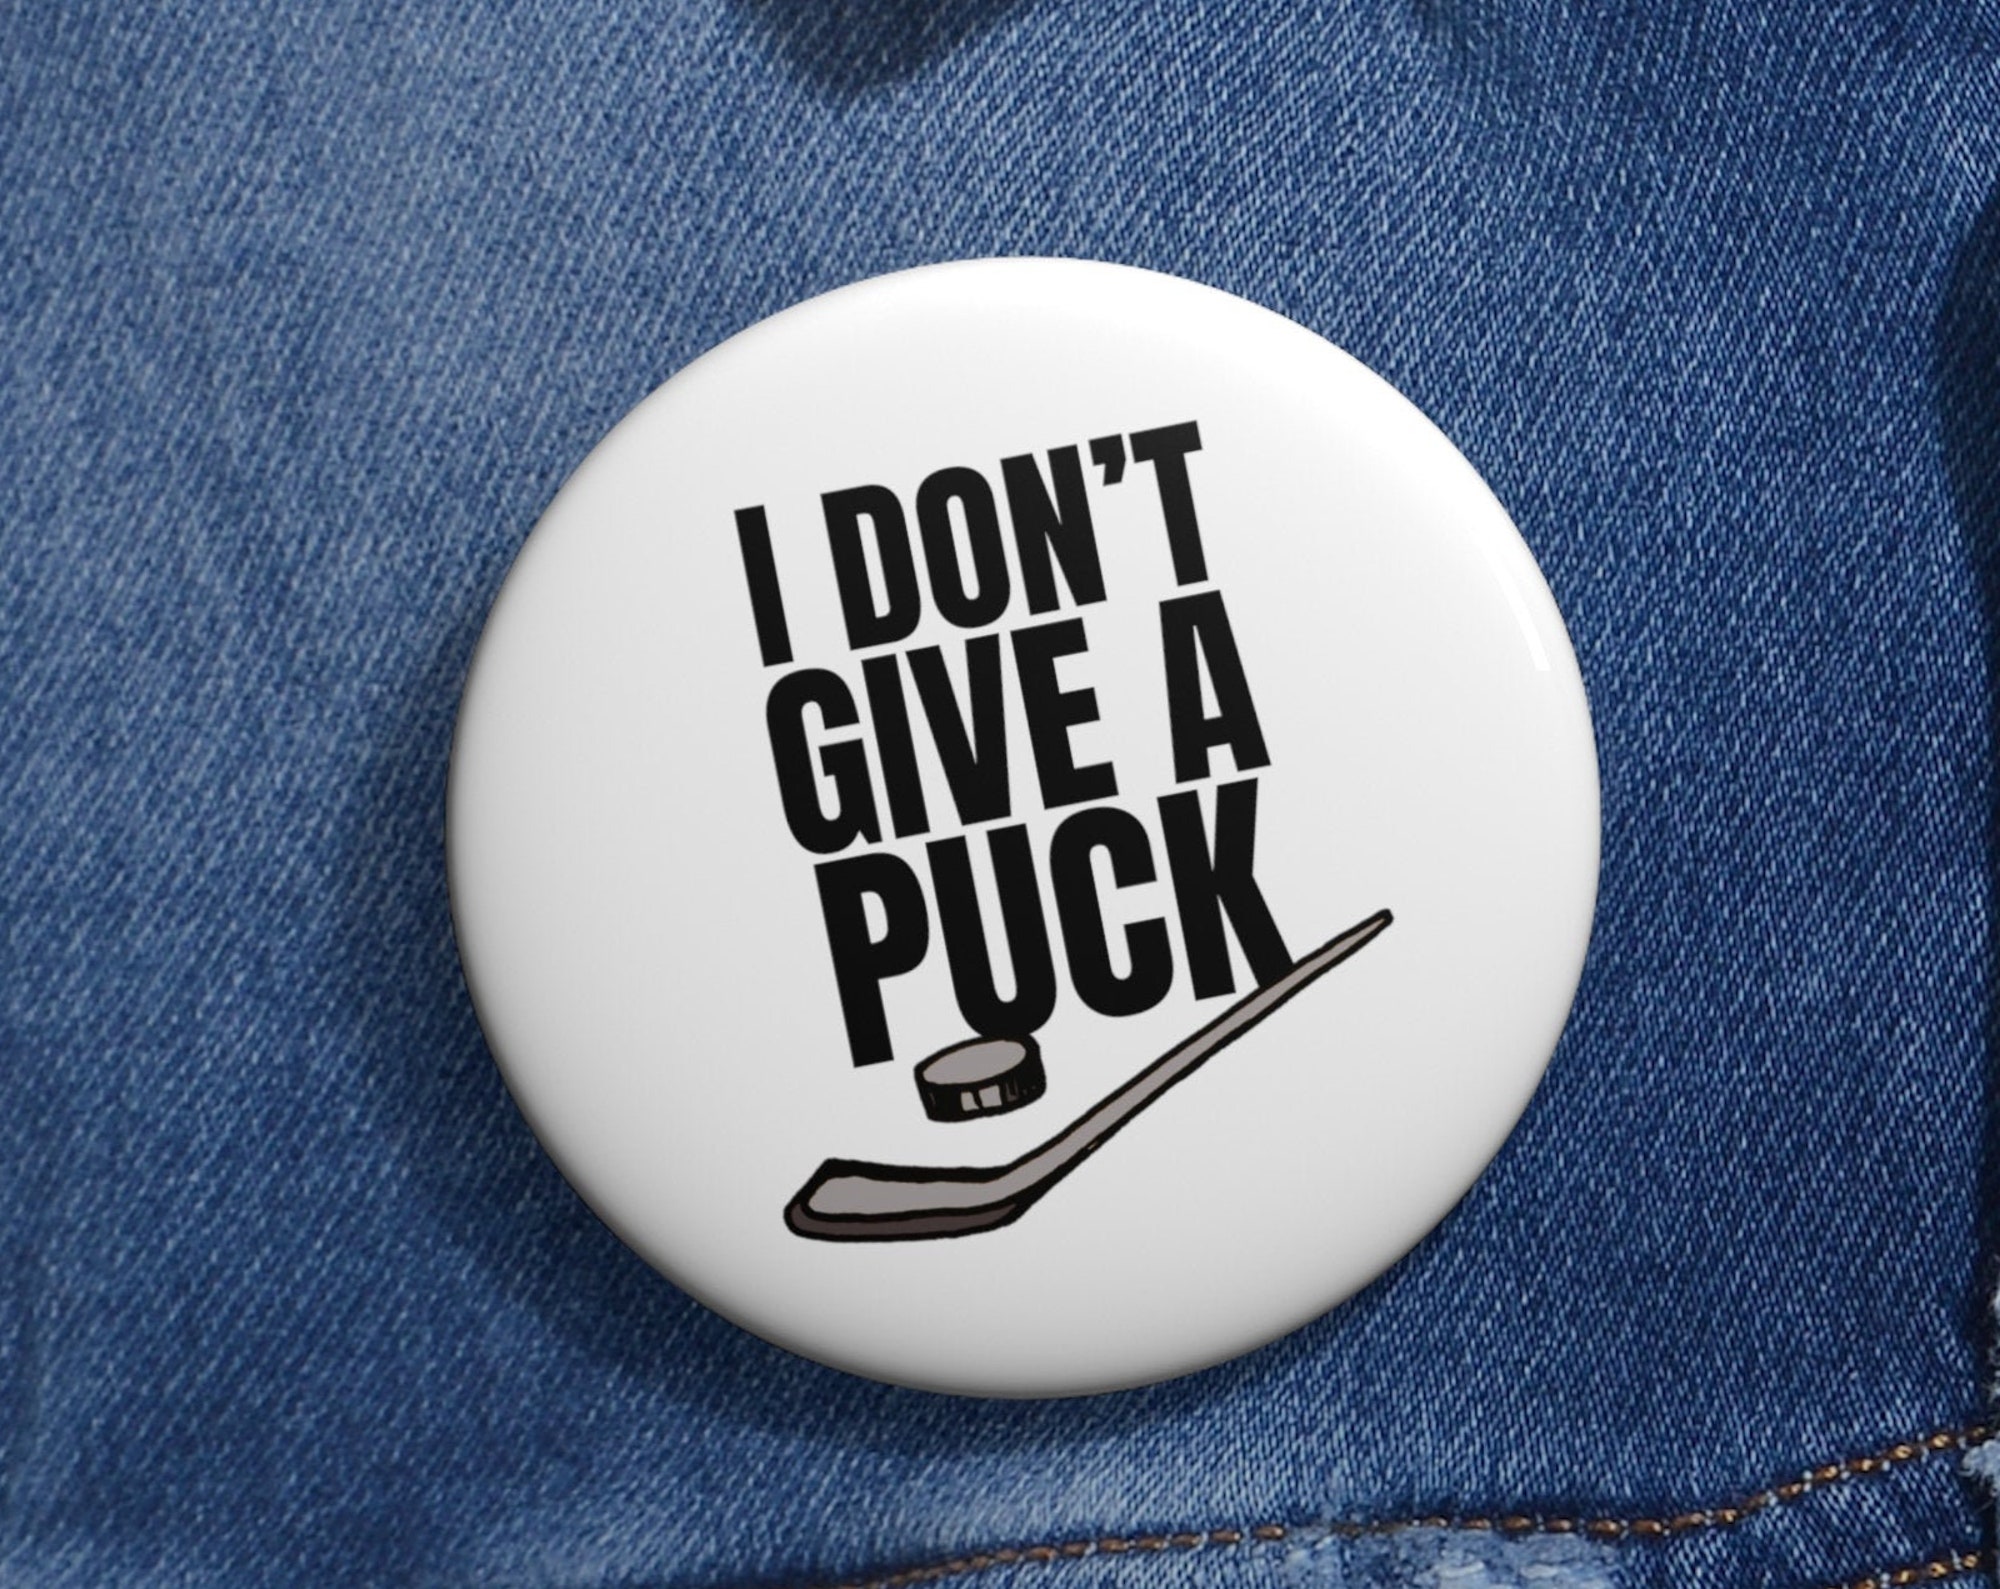 Ice Hockey Pin Button Badge, I Don't Give a Puck - Ice Hockey Puck Gifts